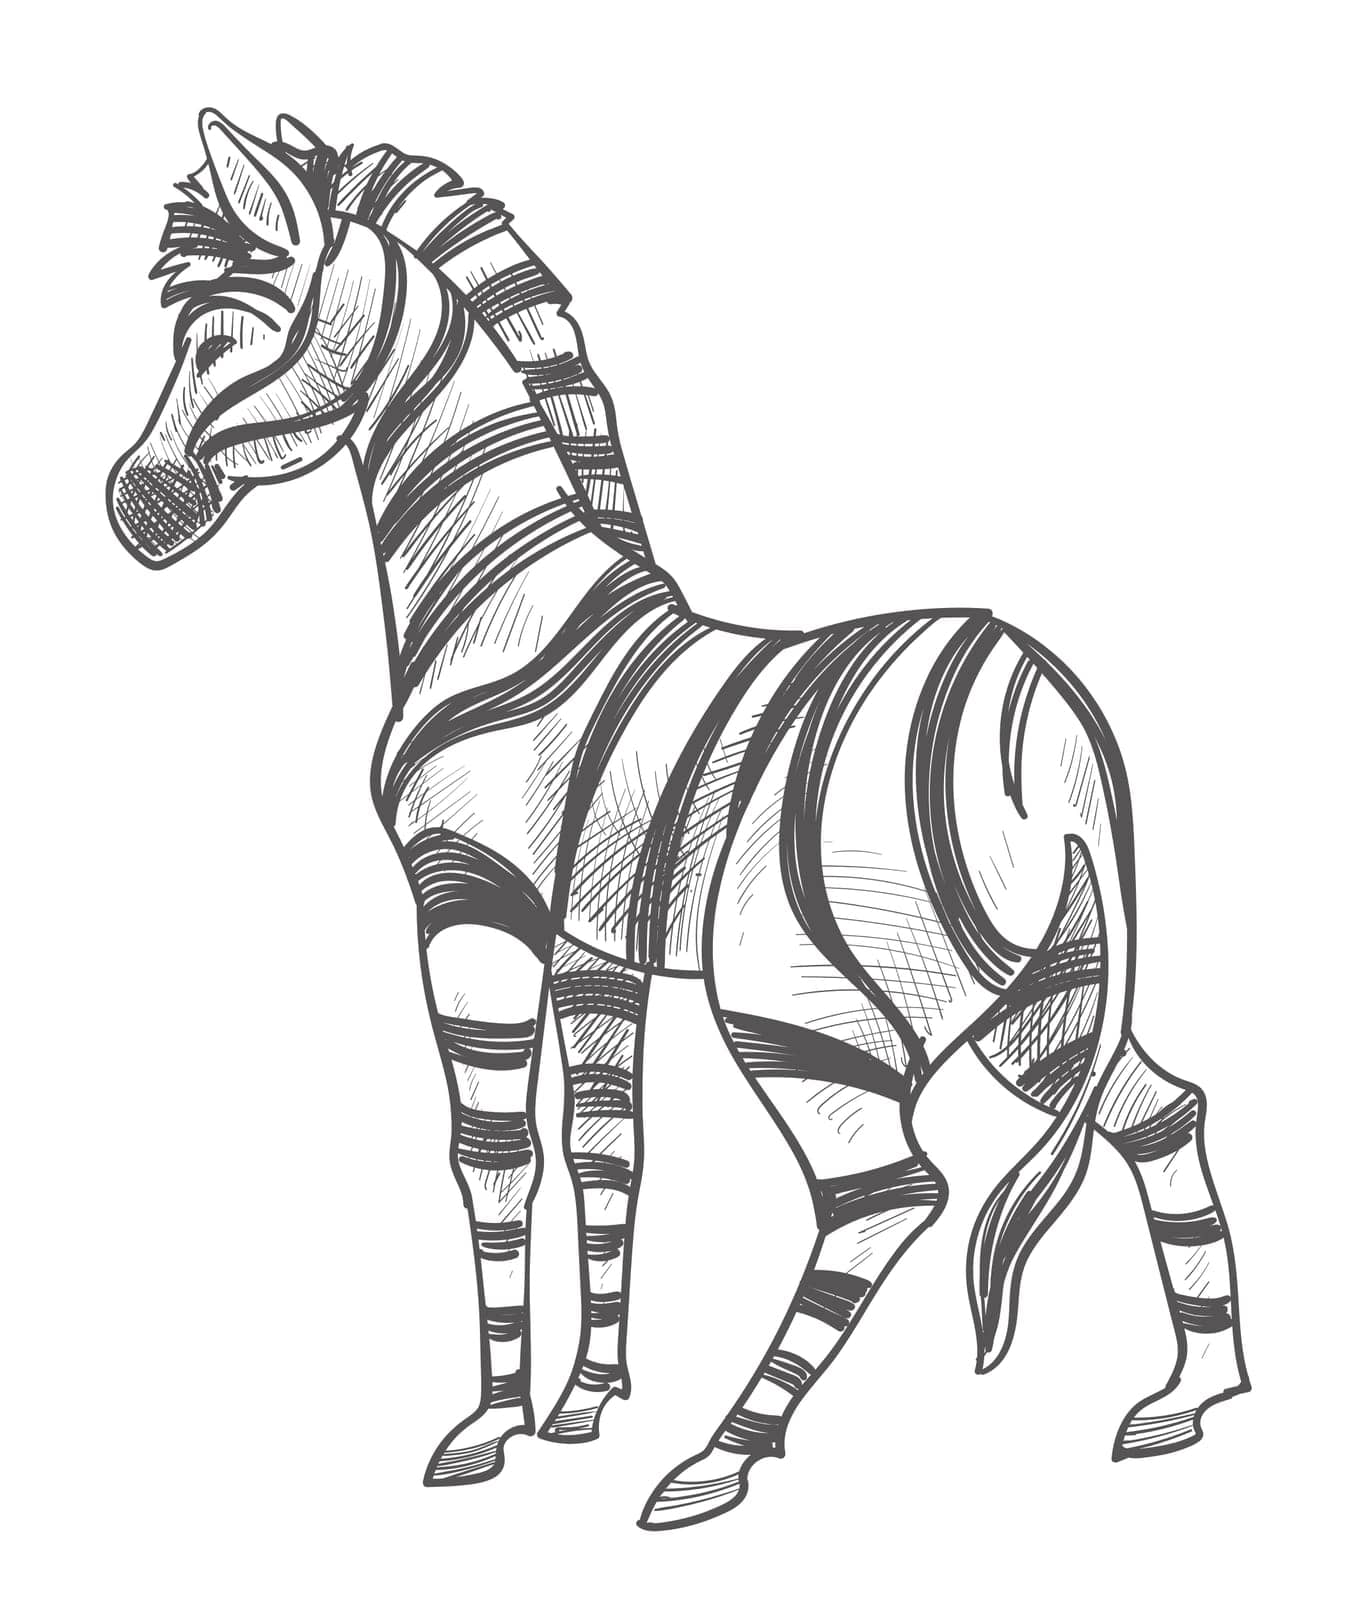 Herbivorous animal with stripes on fur, isolated mammal in zoo or natural reservation. Savannah or africa habitat for wilderness, strong stallion. Monochrome sketch outline. Vector in flat style